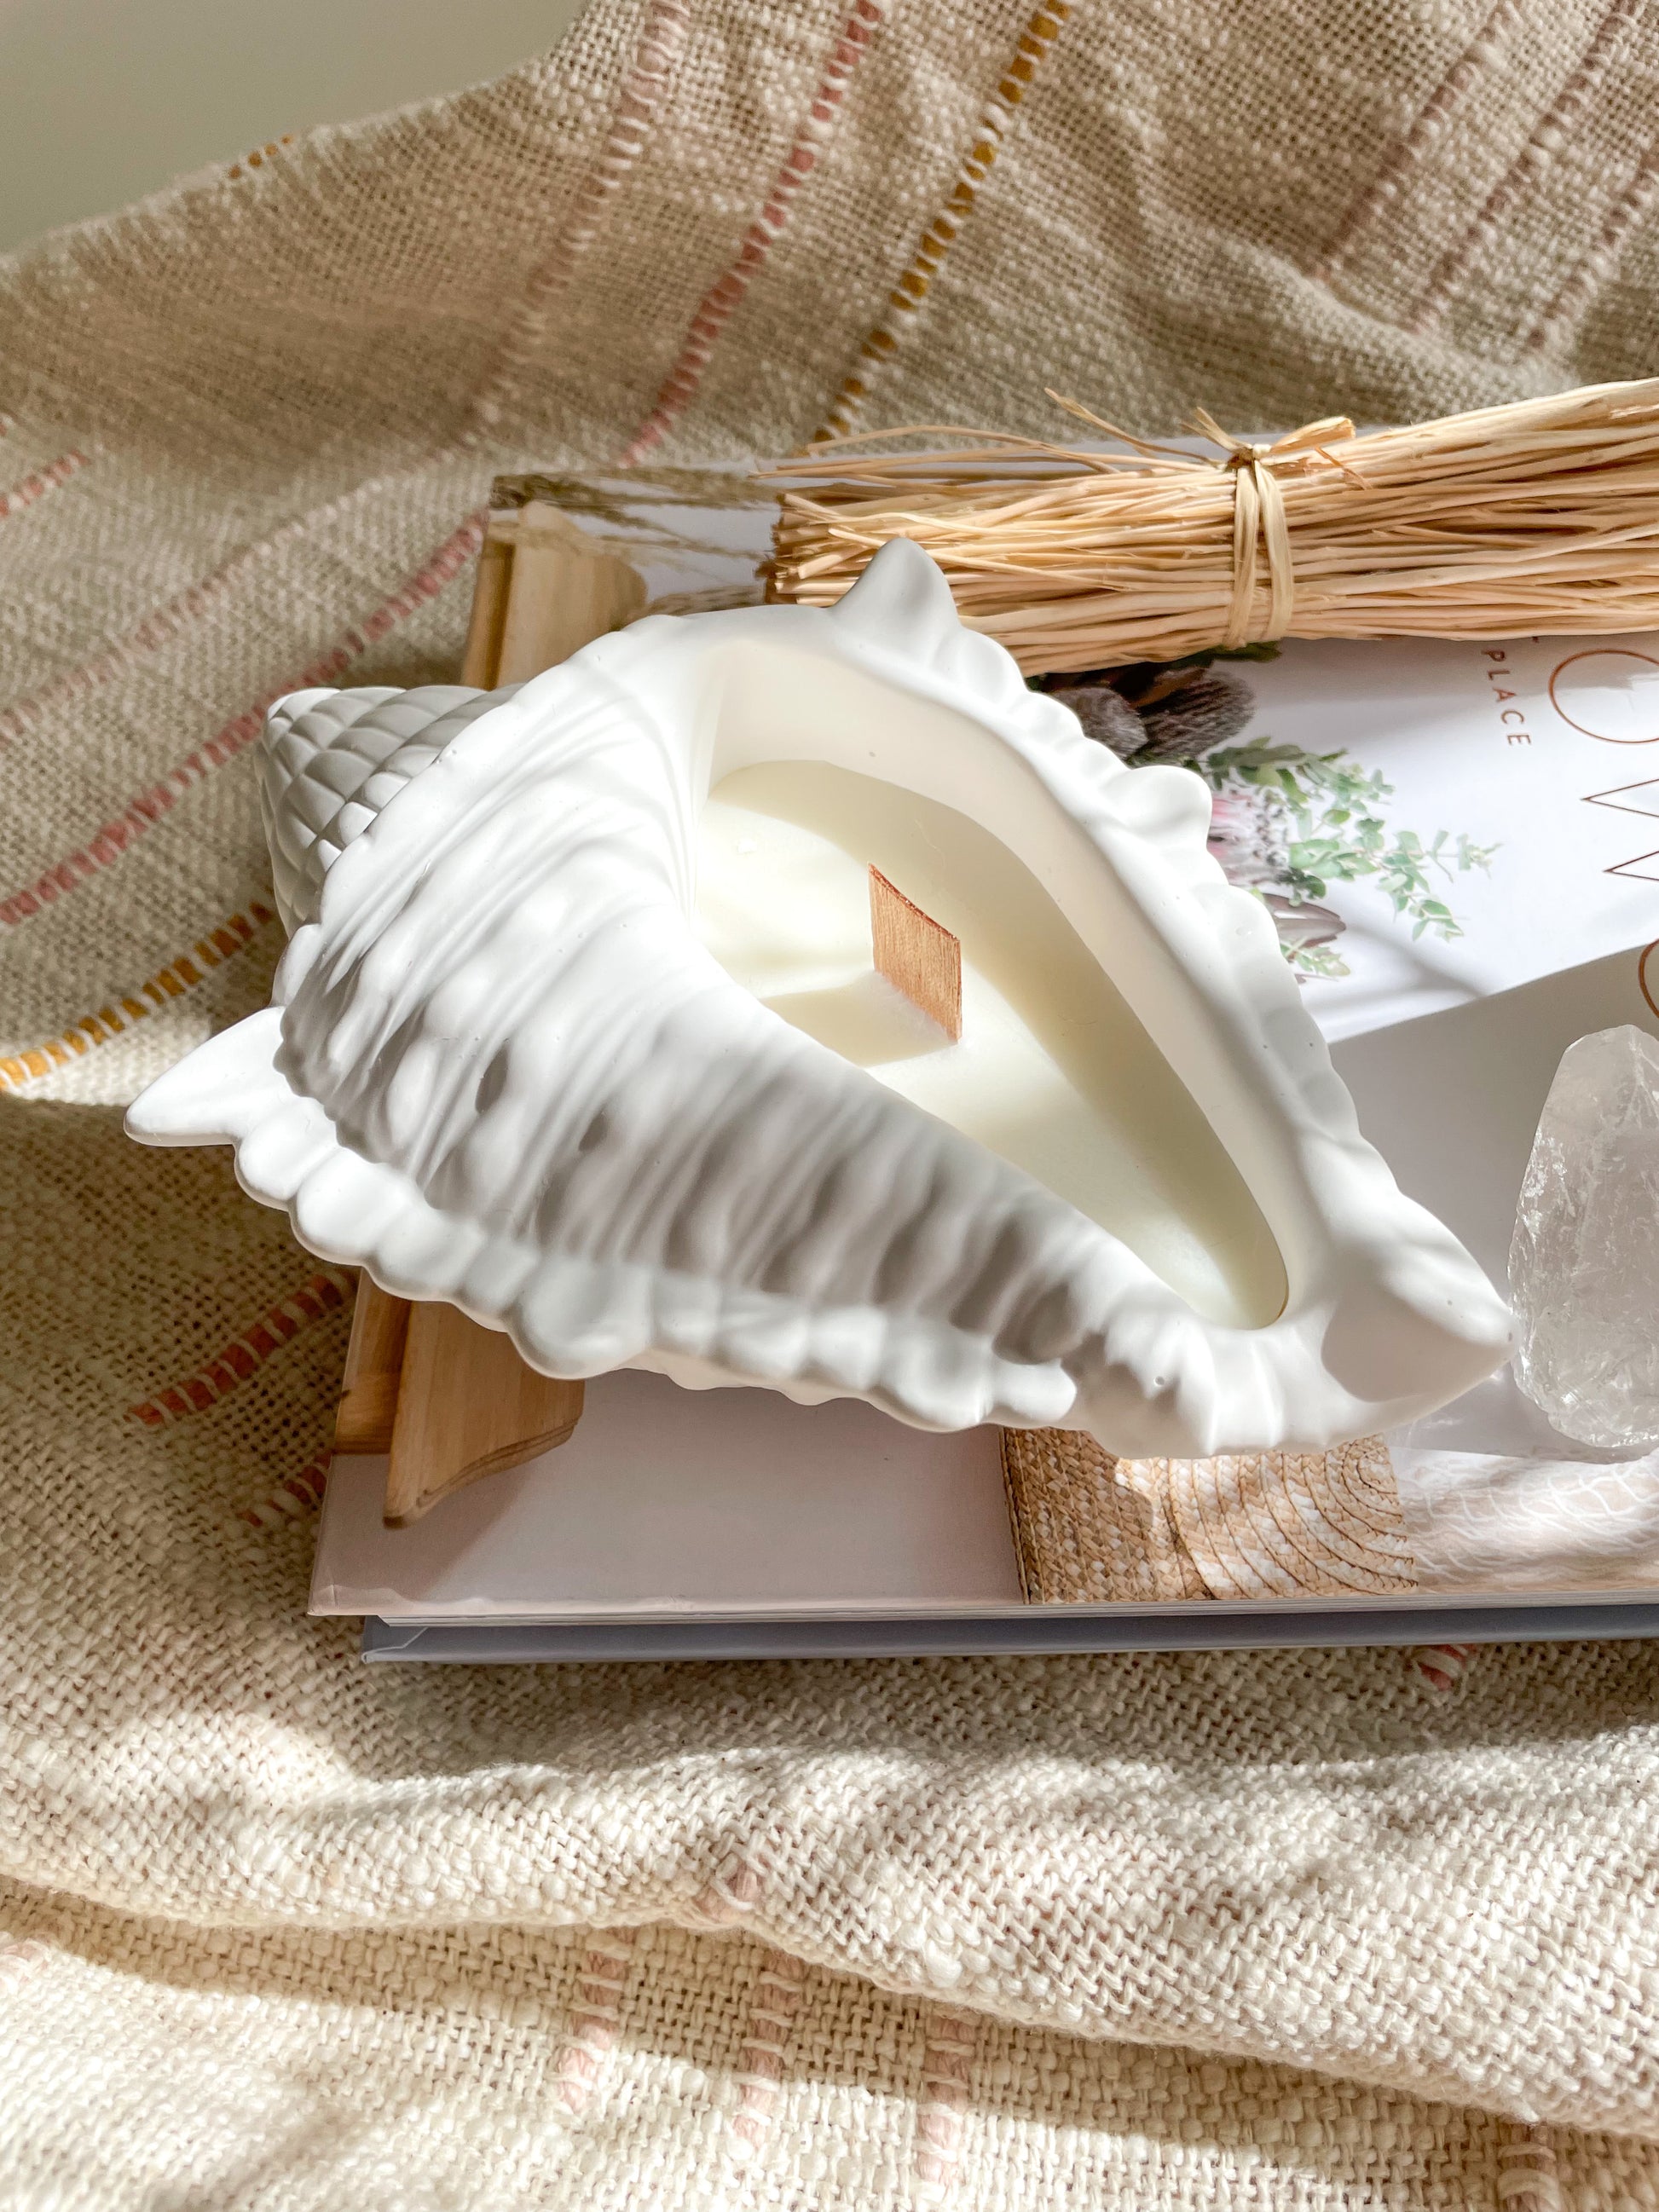 Seashell soywax candle styled on a coffee table book with crystals and rattan ornaments